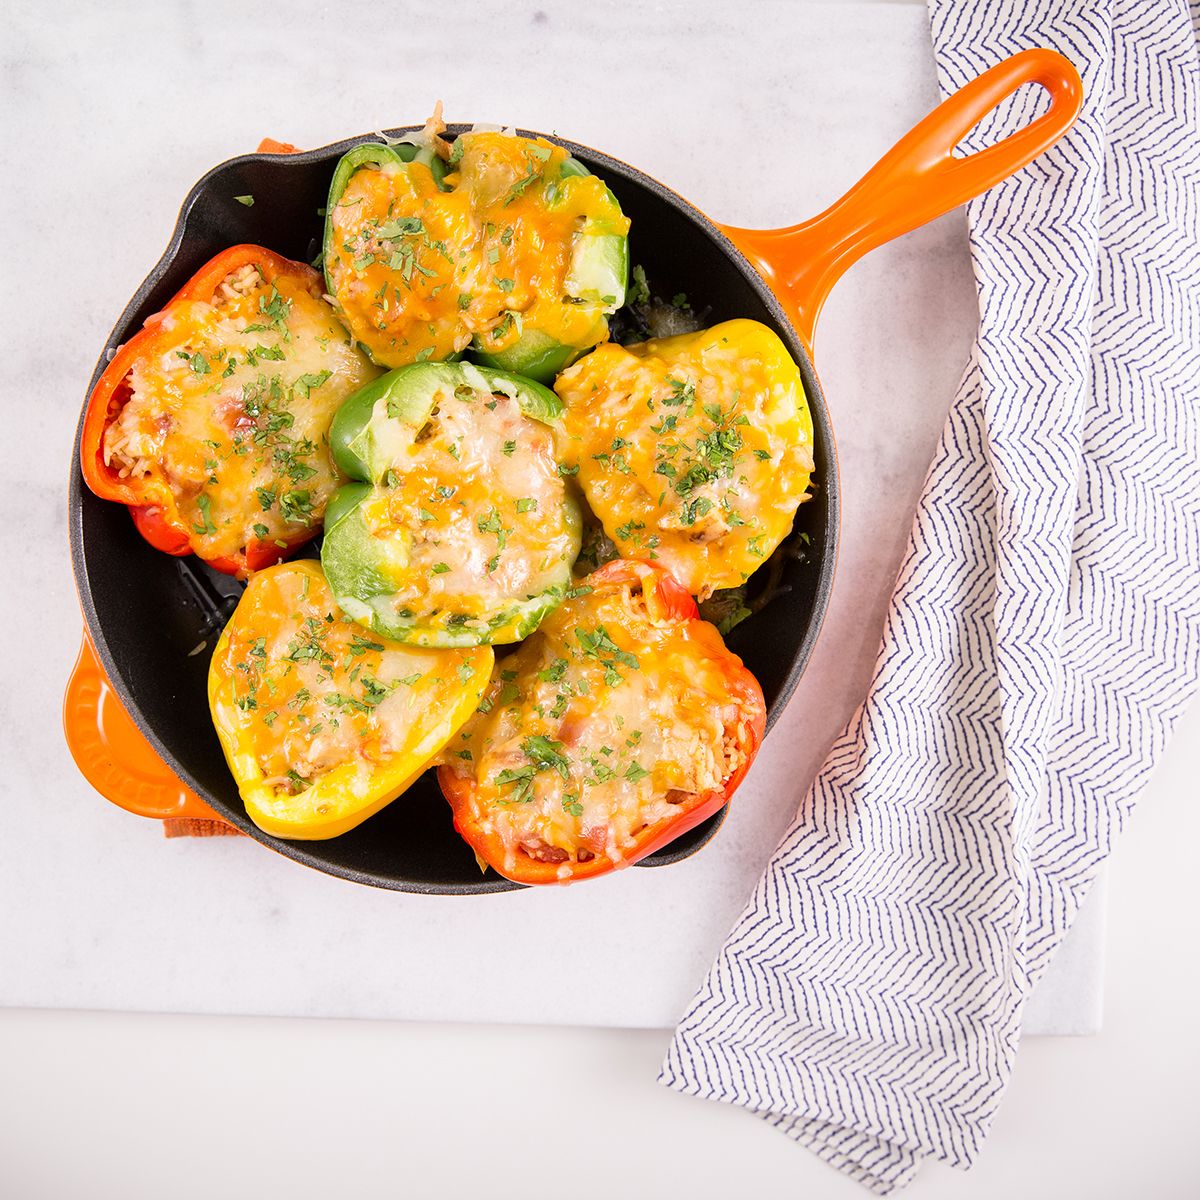 FoodieFiles_S1E2_StuffedPeppers05 square.jpg